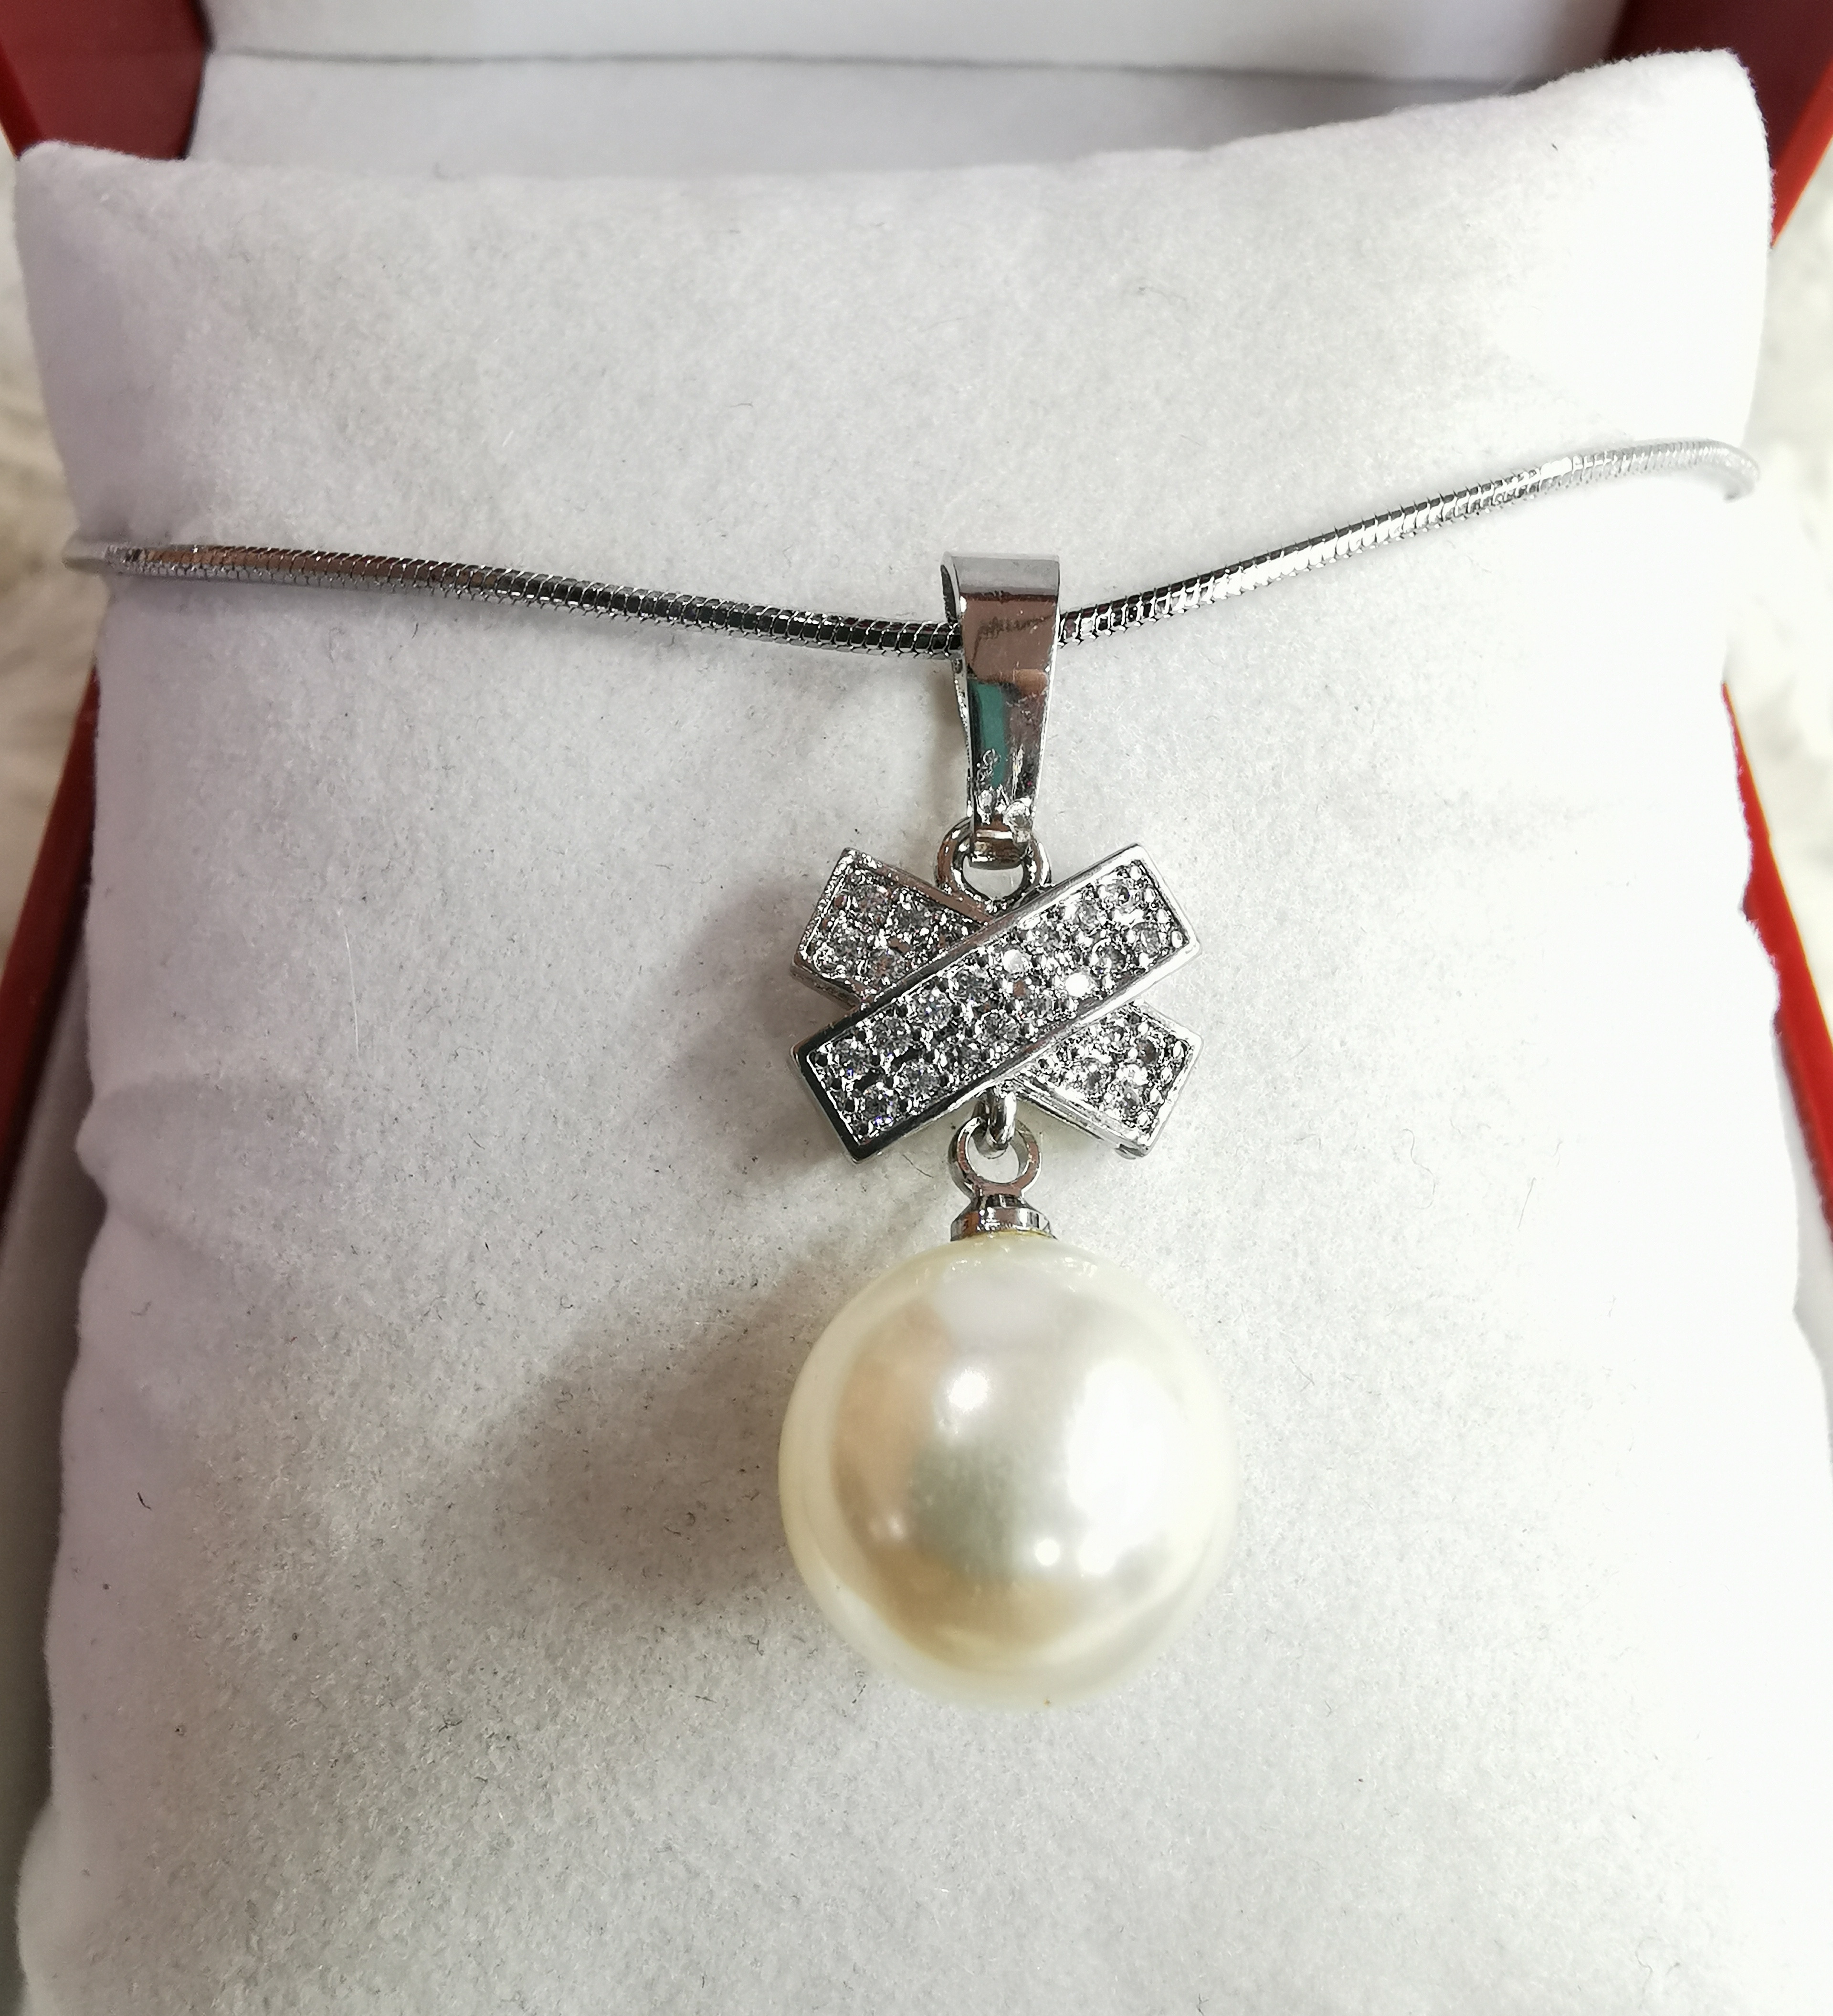 real pearl necklace online shopping